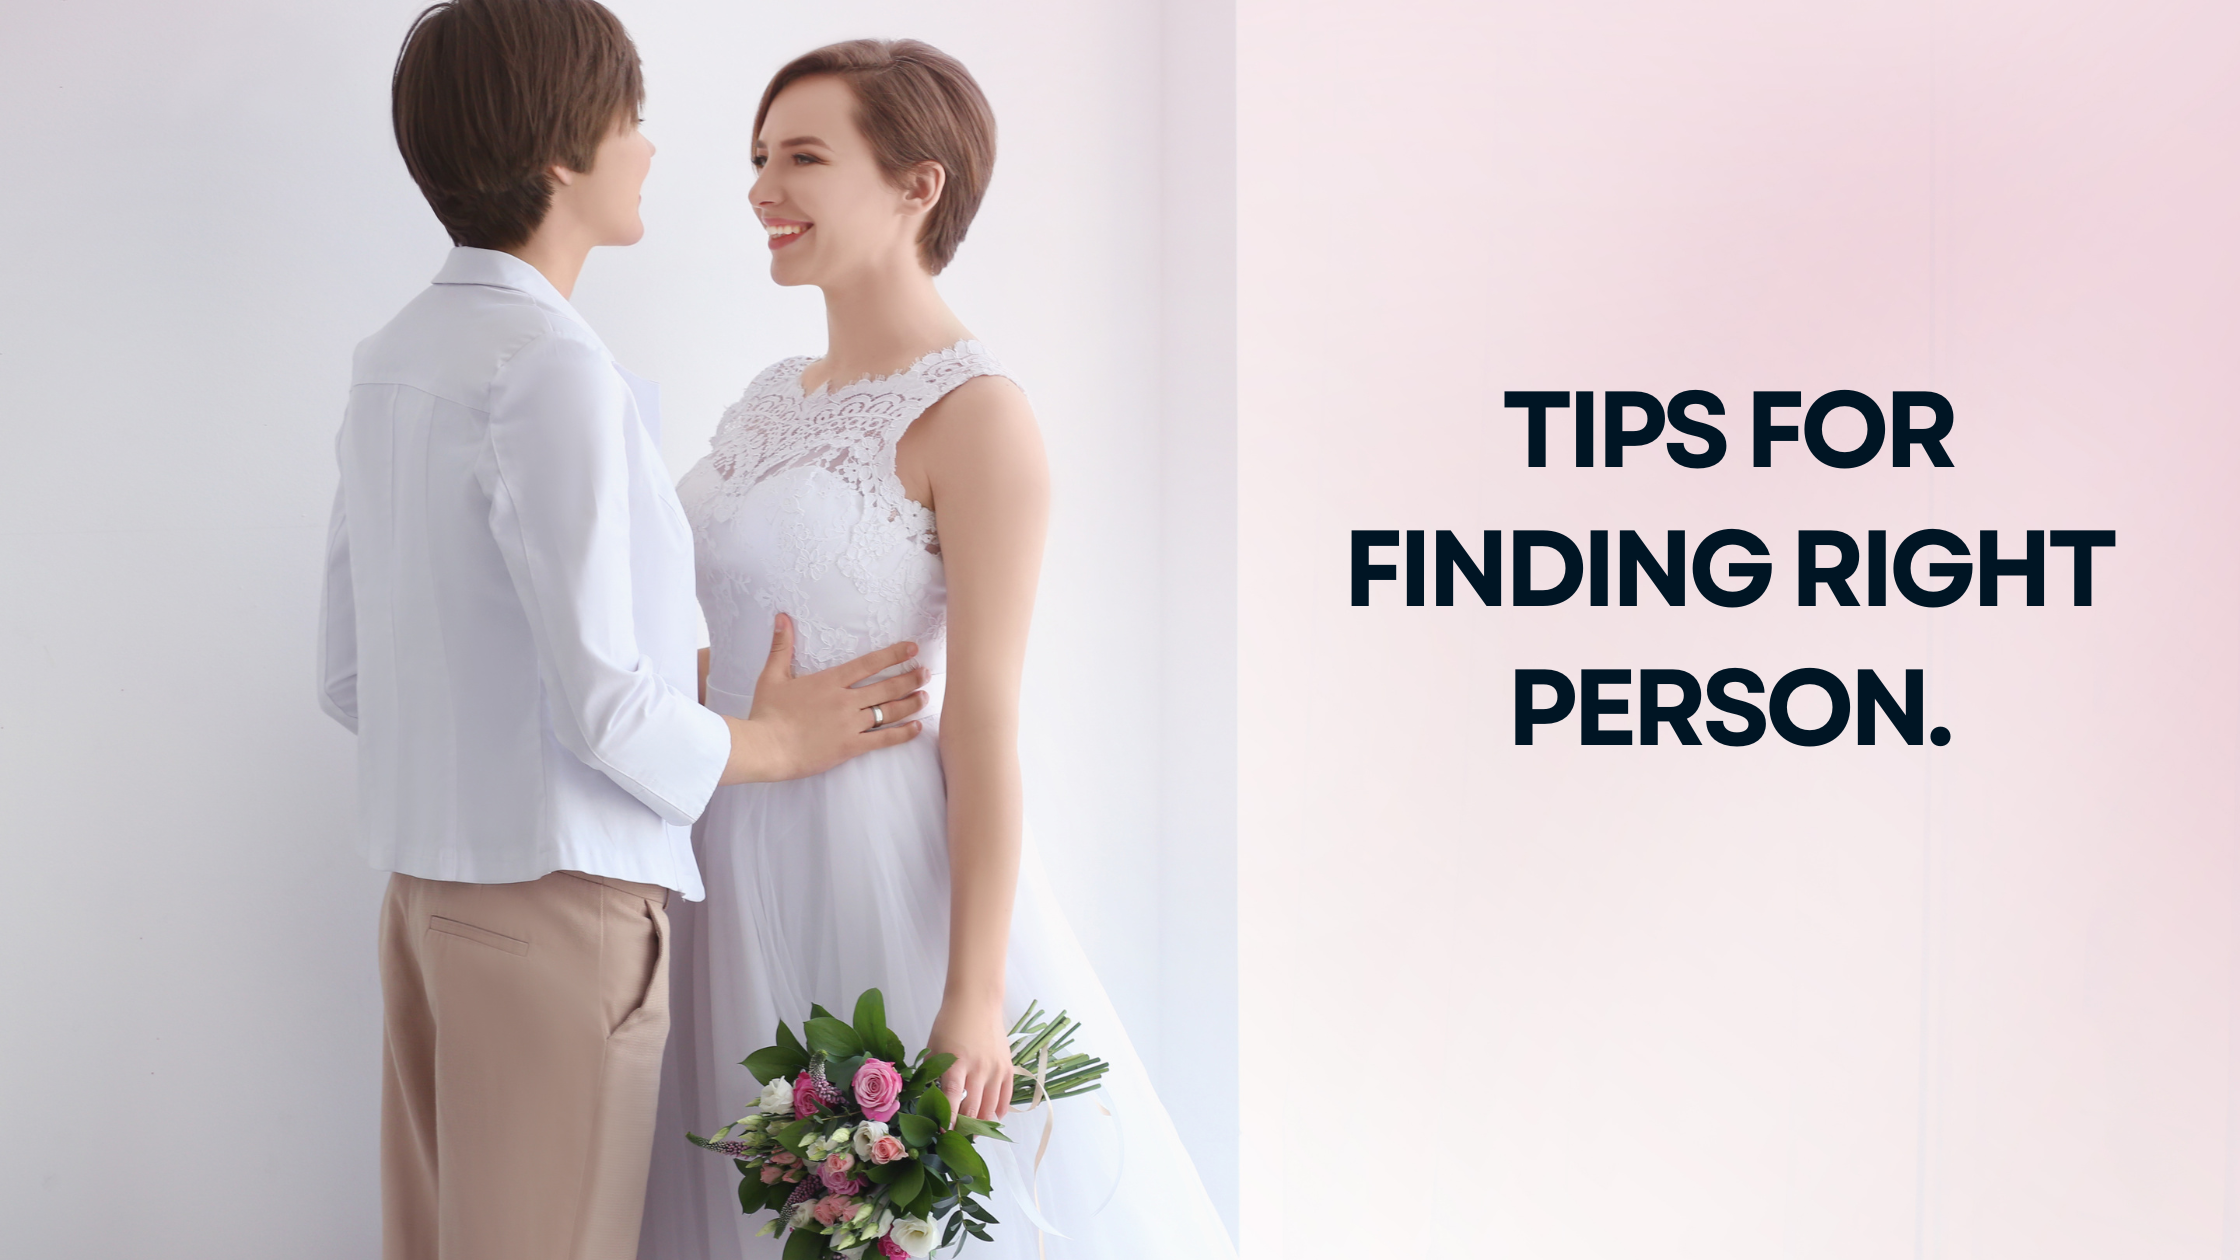 Tips for Finding Right Person.